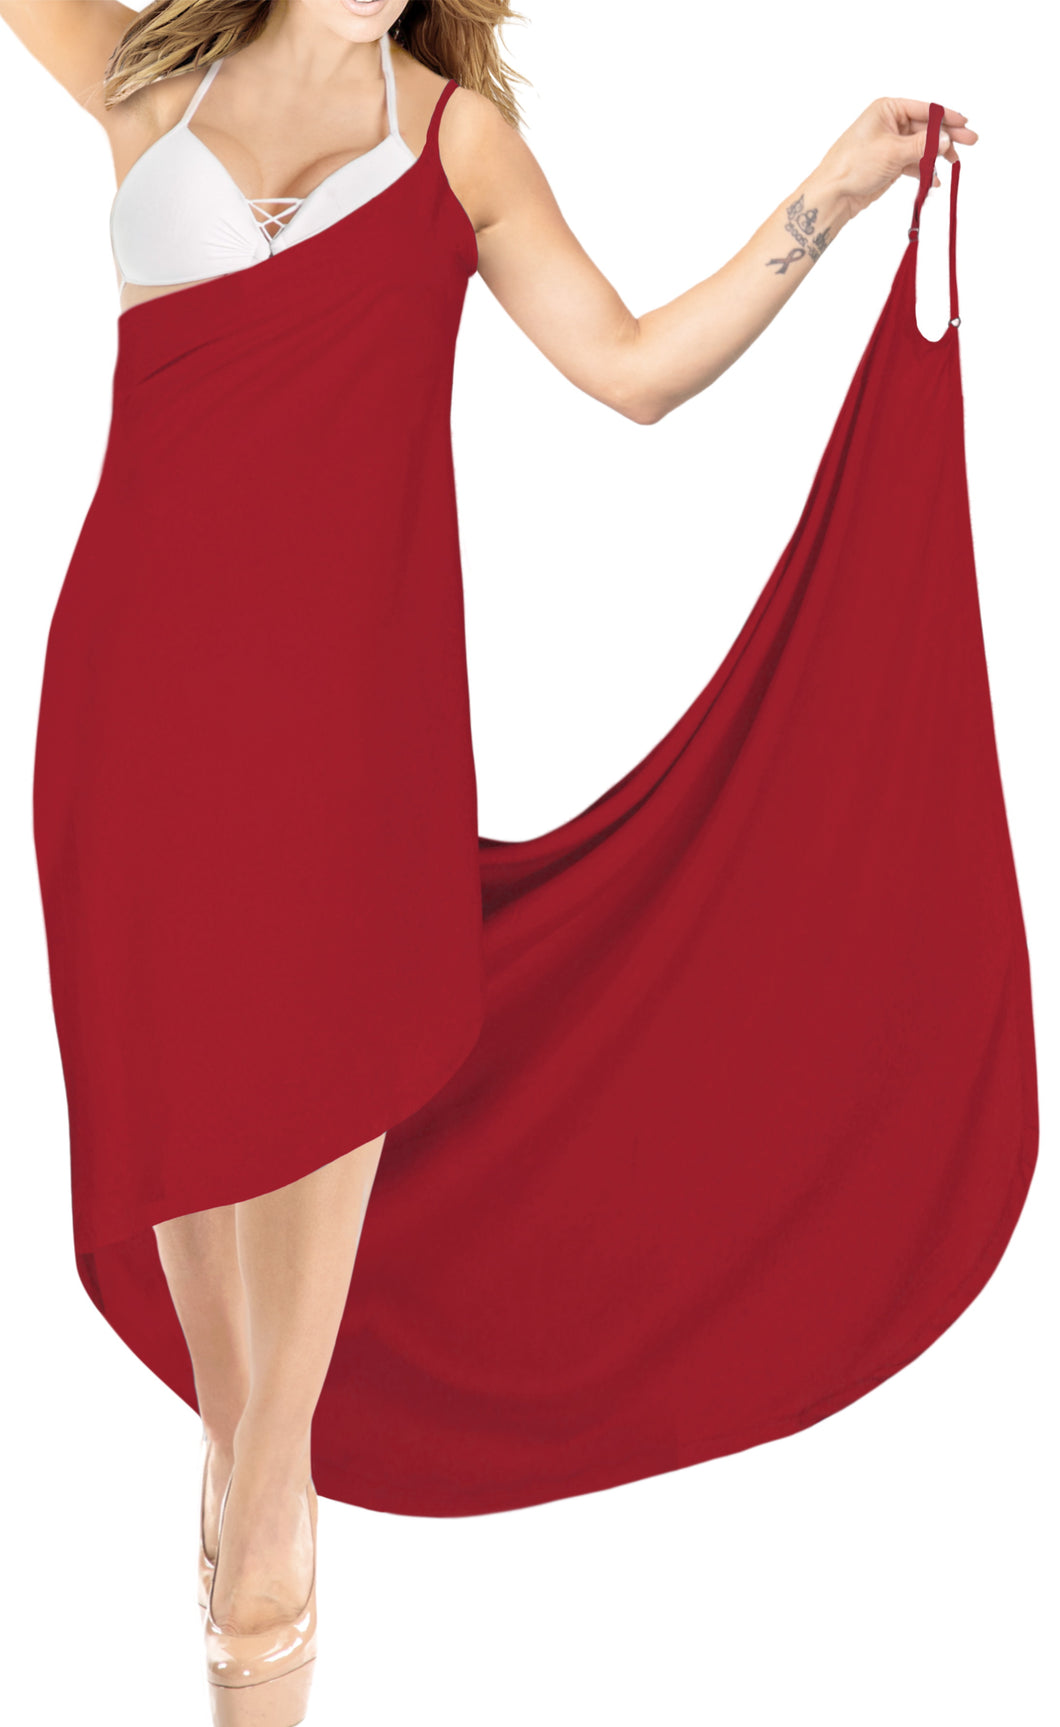 la-leela-rayon-bathing-towel-Women's-Sarong-Swimsuit-Cover-Up-Summer-Beach-Wrap-Skirt-Full-Long-Blood Red_A303